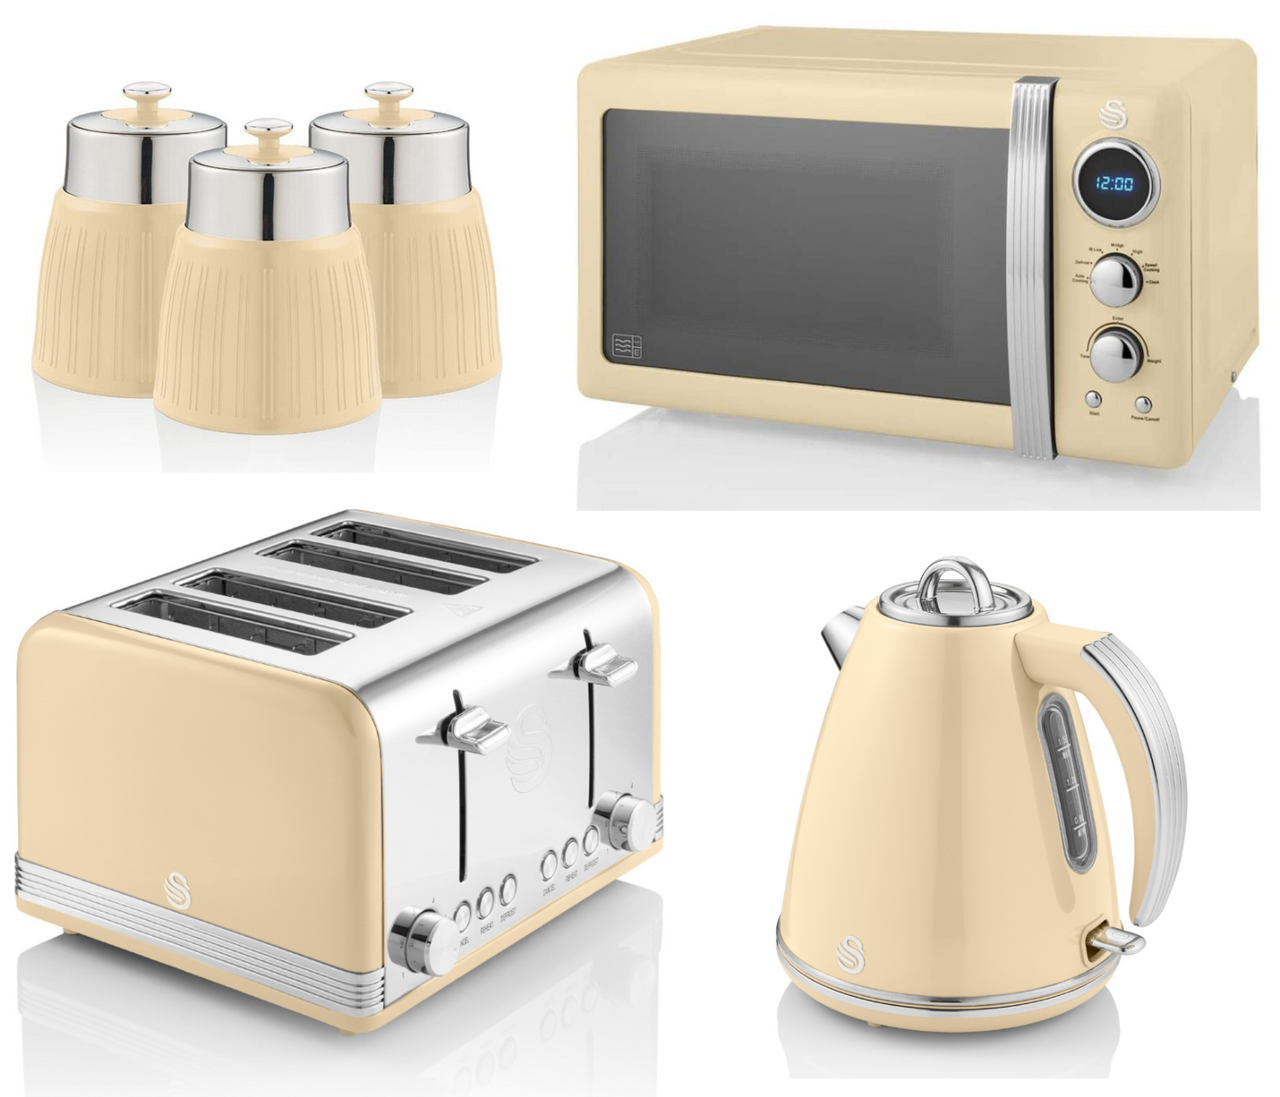 Swan Retro Cream 1.5L 3KW Jug Kettle, 4 Slice Toaster, 800W 20L Digital Microwave & Tea, Coffee, Sugar Canisters. Vintage Matching Kitchen Set of 6 in Cream